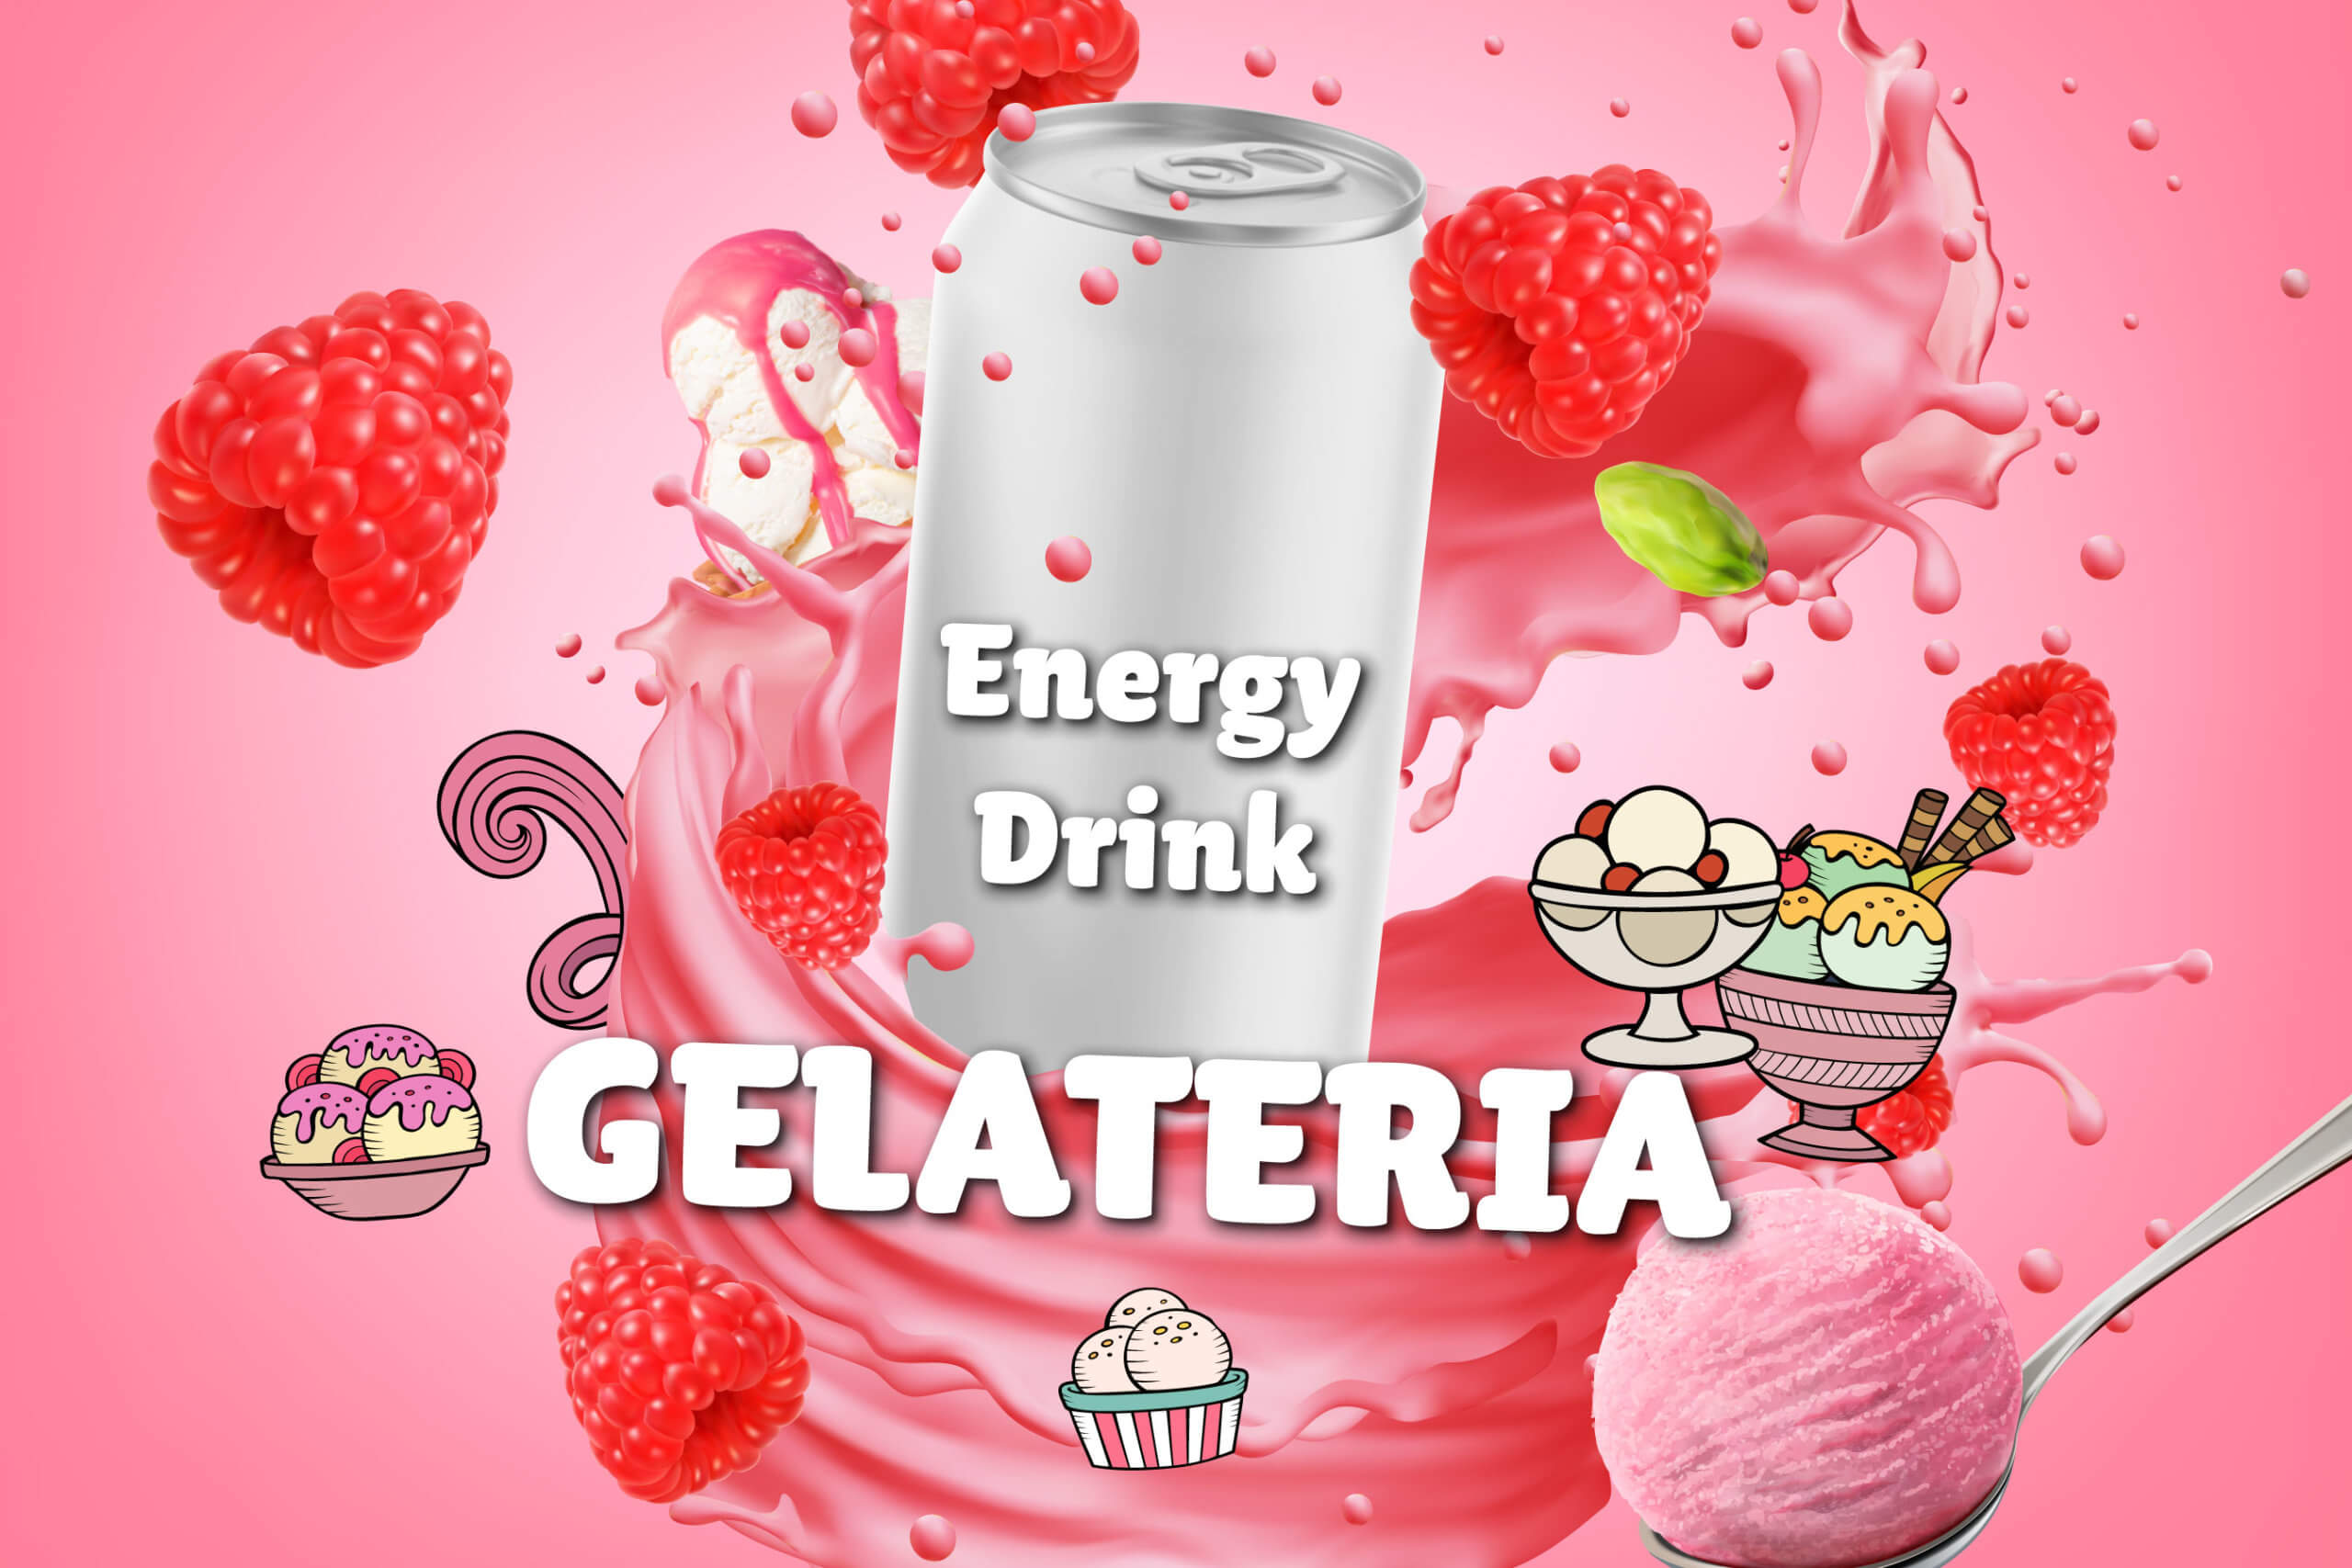 Enjoy your energy drink flavoured with ice cream